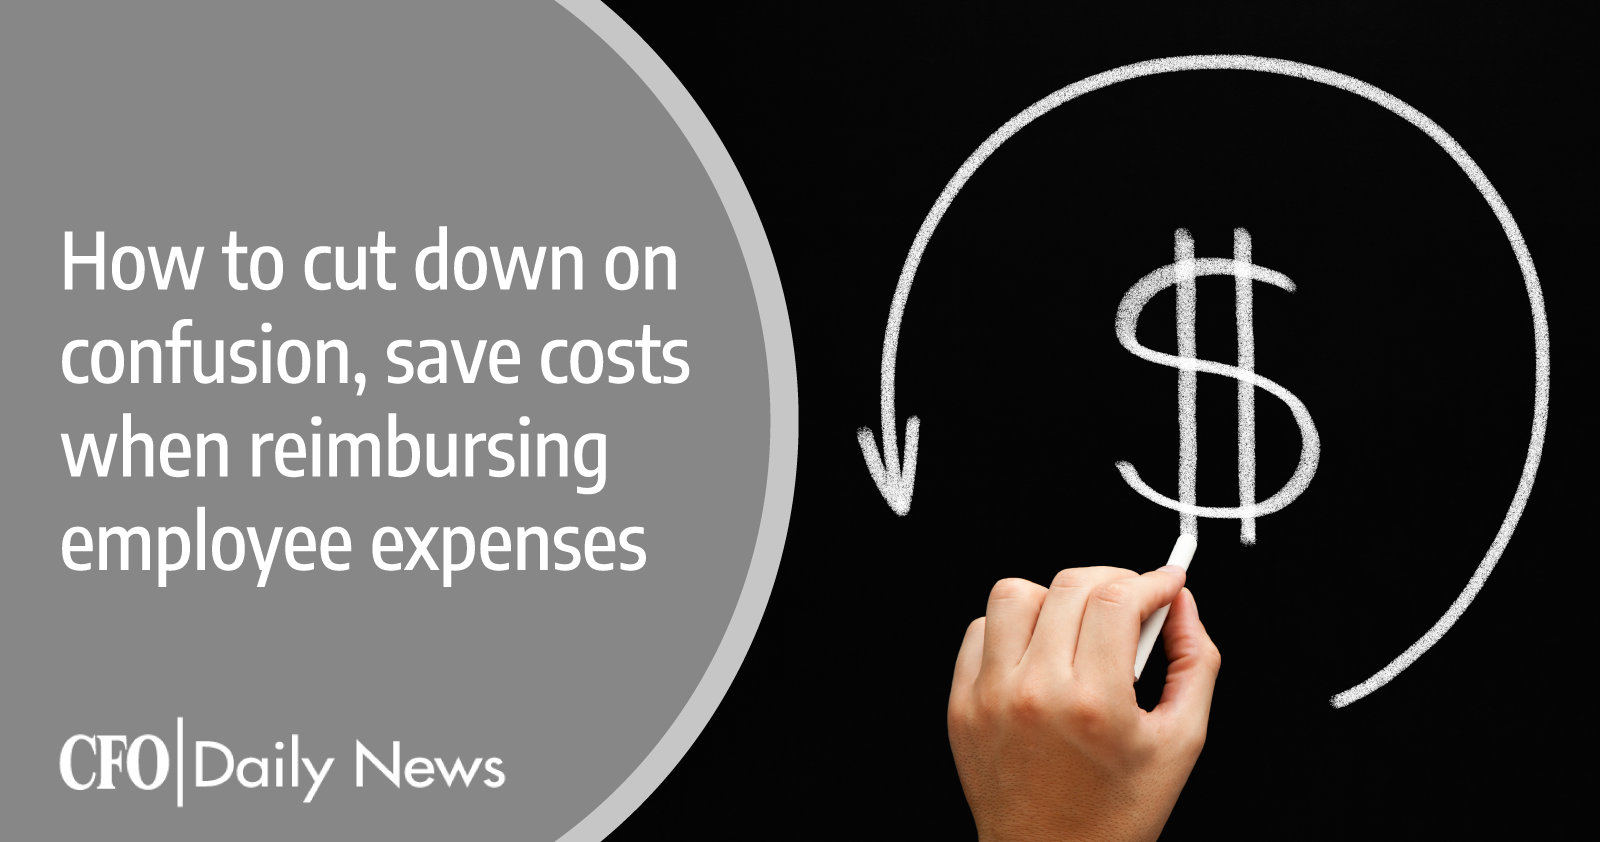 How To Cut Down On Confusion Save Costs When Reimbursing Employee Expenses